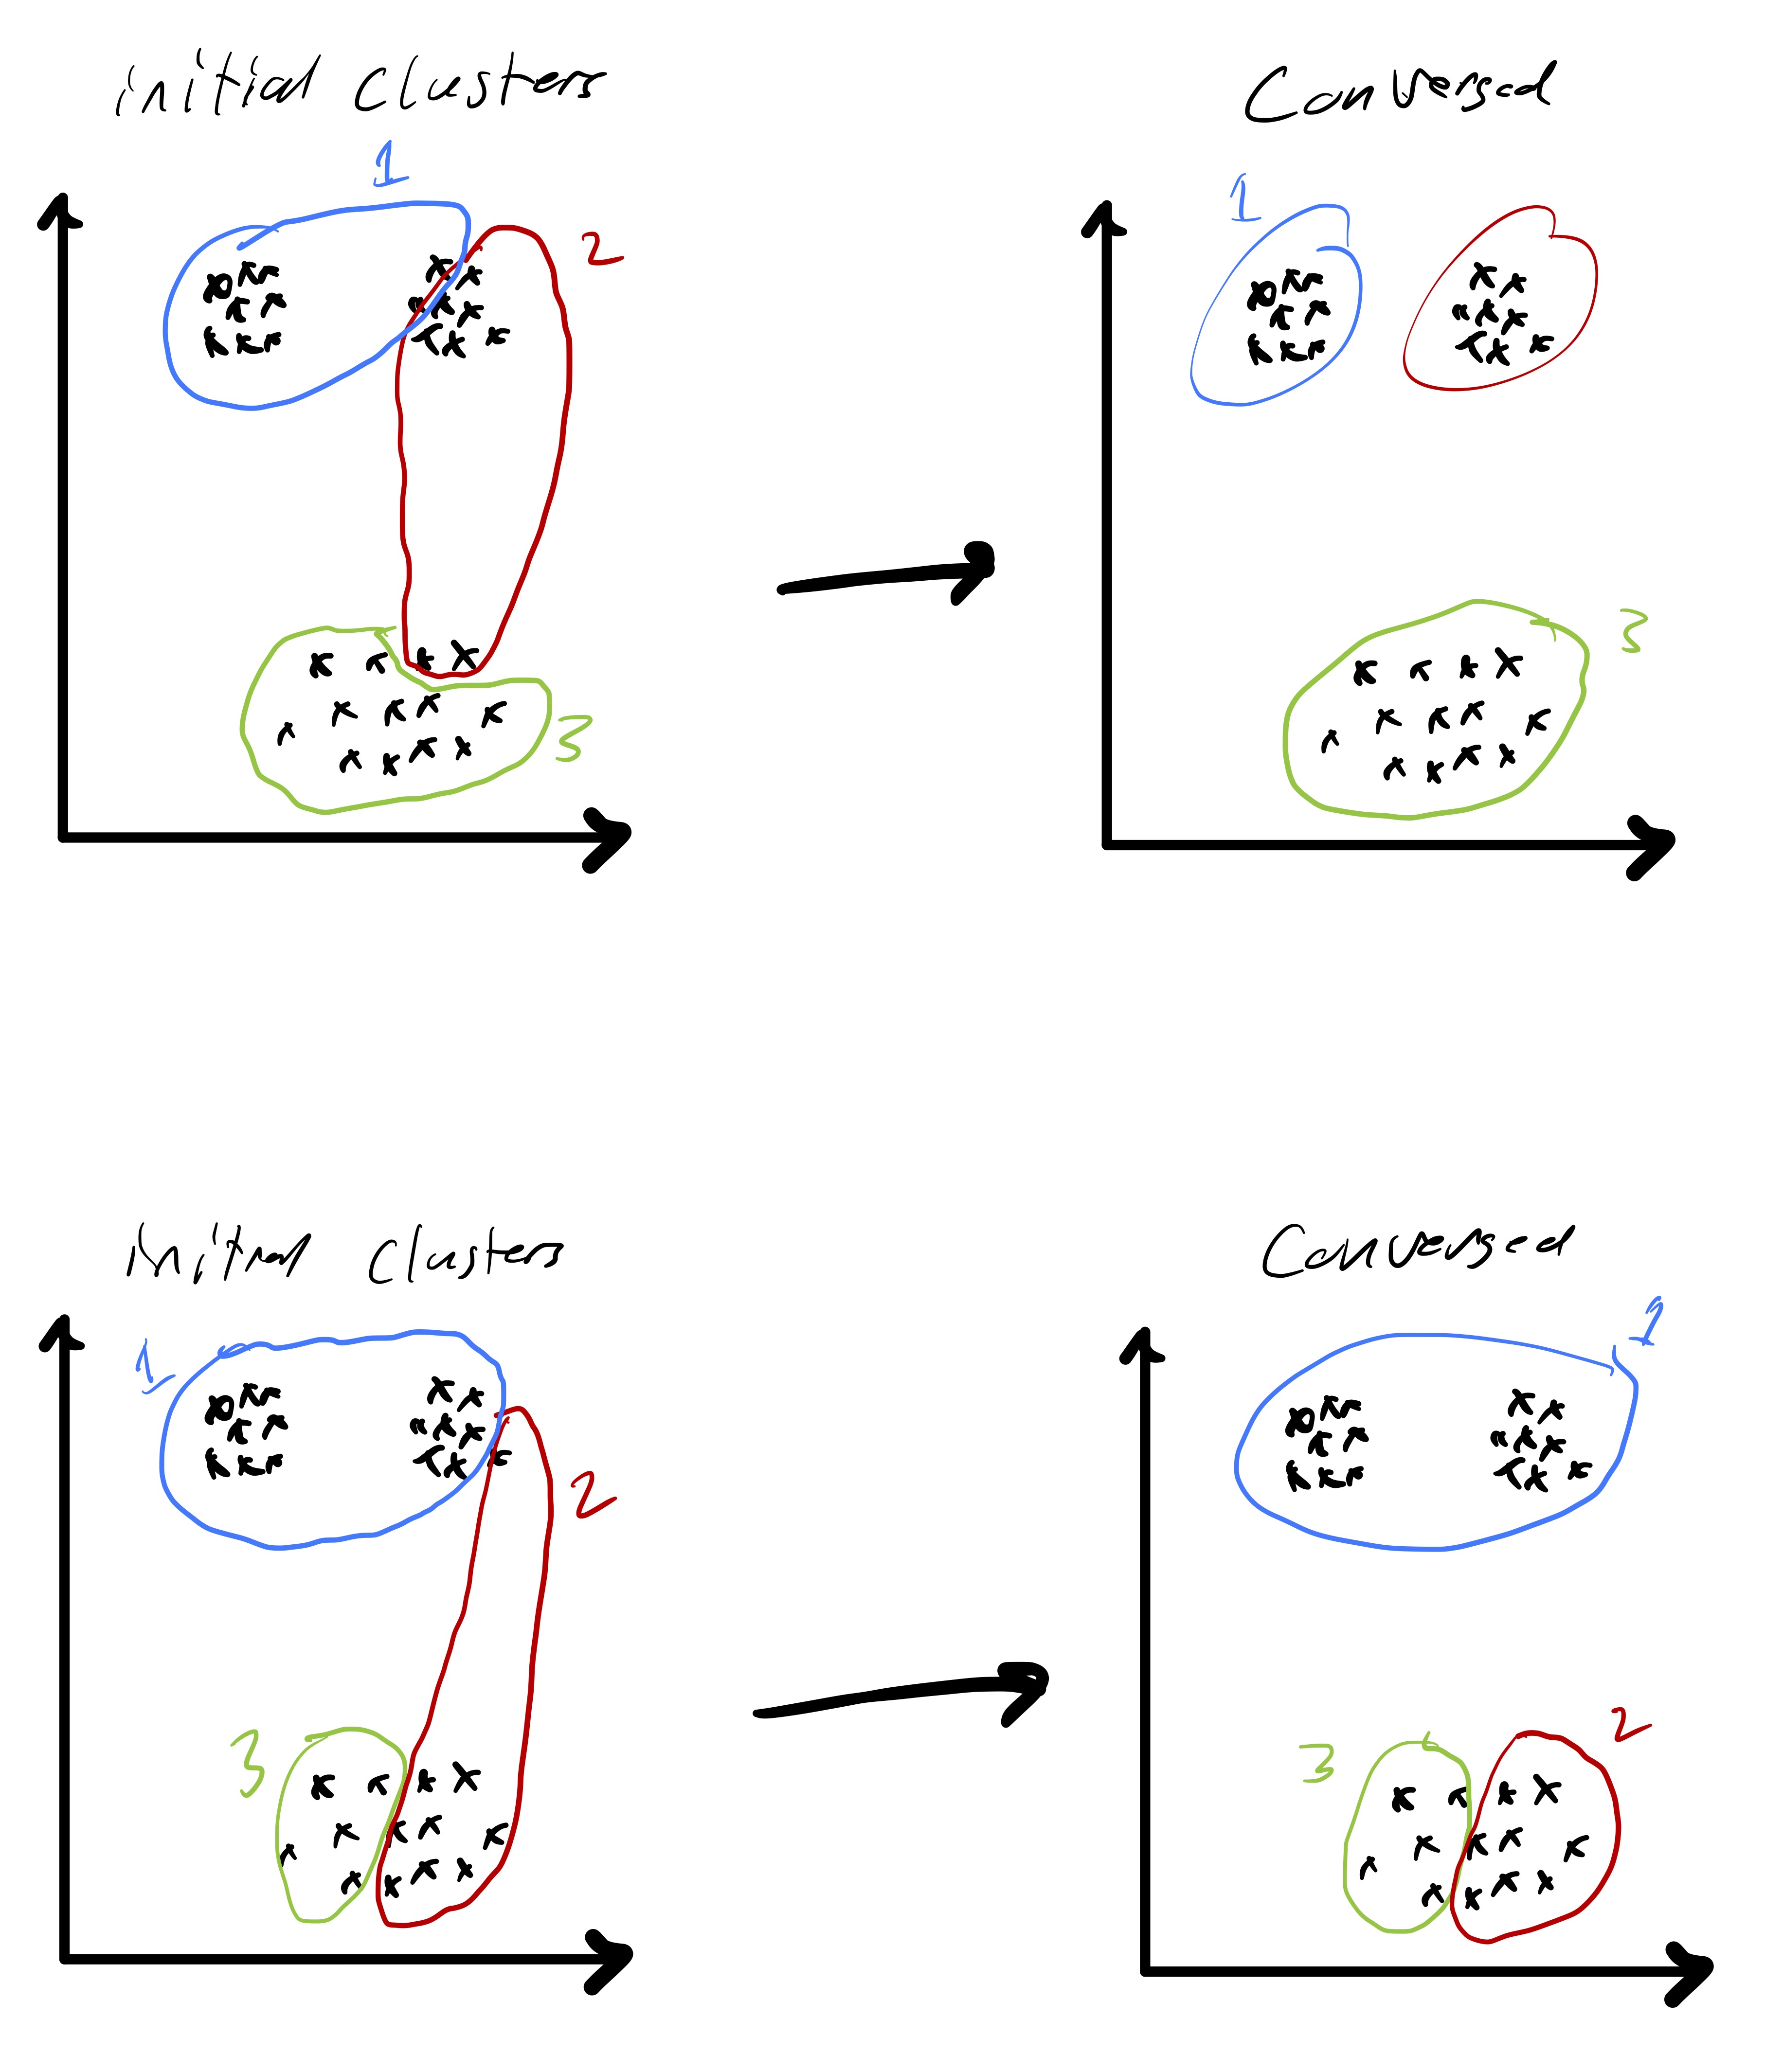 Figure 6: The result of k-means clustering for a simple data set from two different initializations—one results in a good clustering and one results in a clustering that is far from optimal.